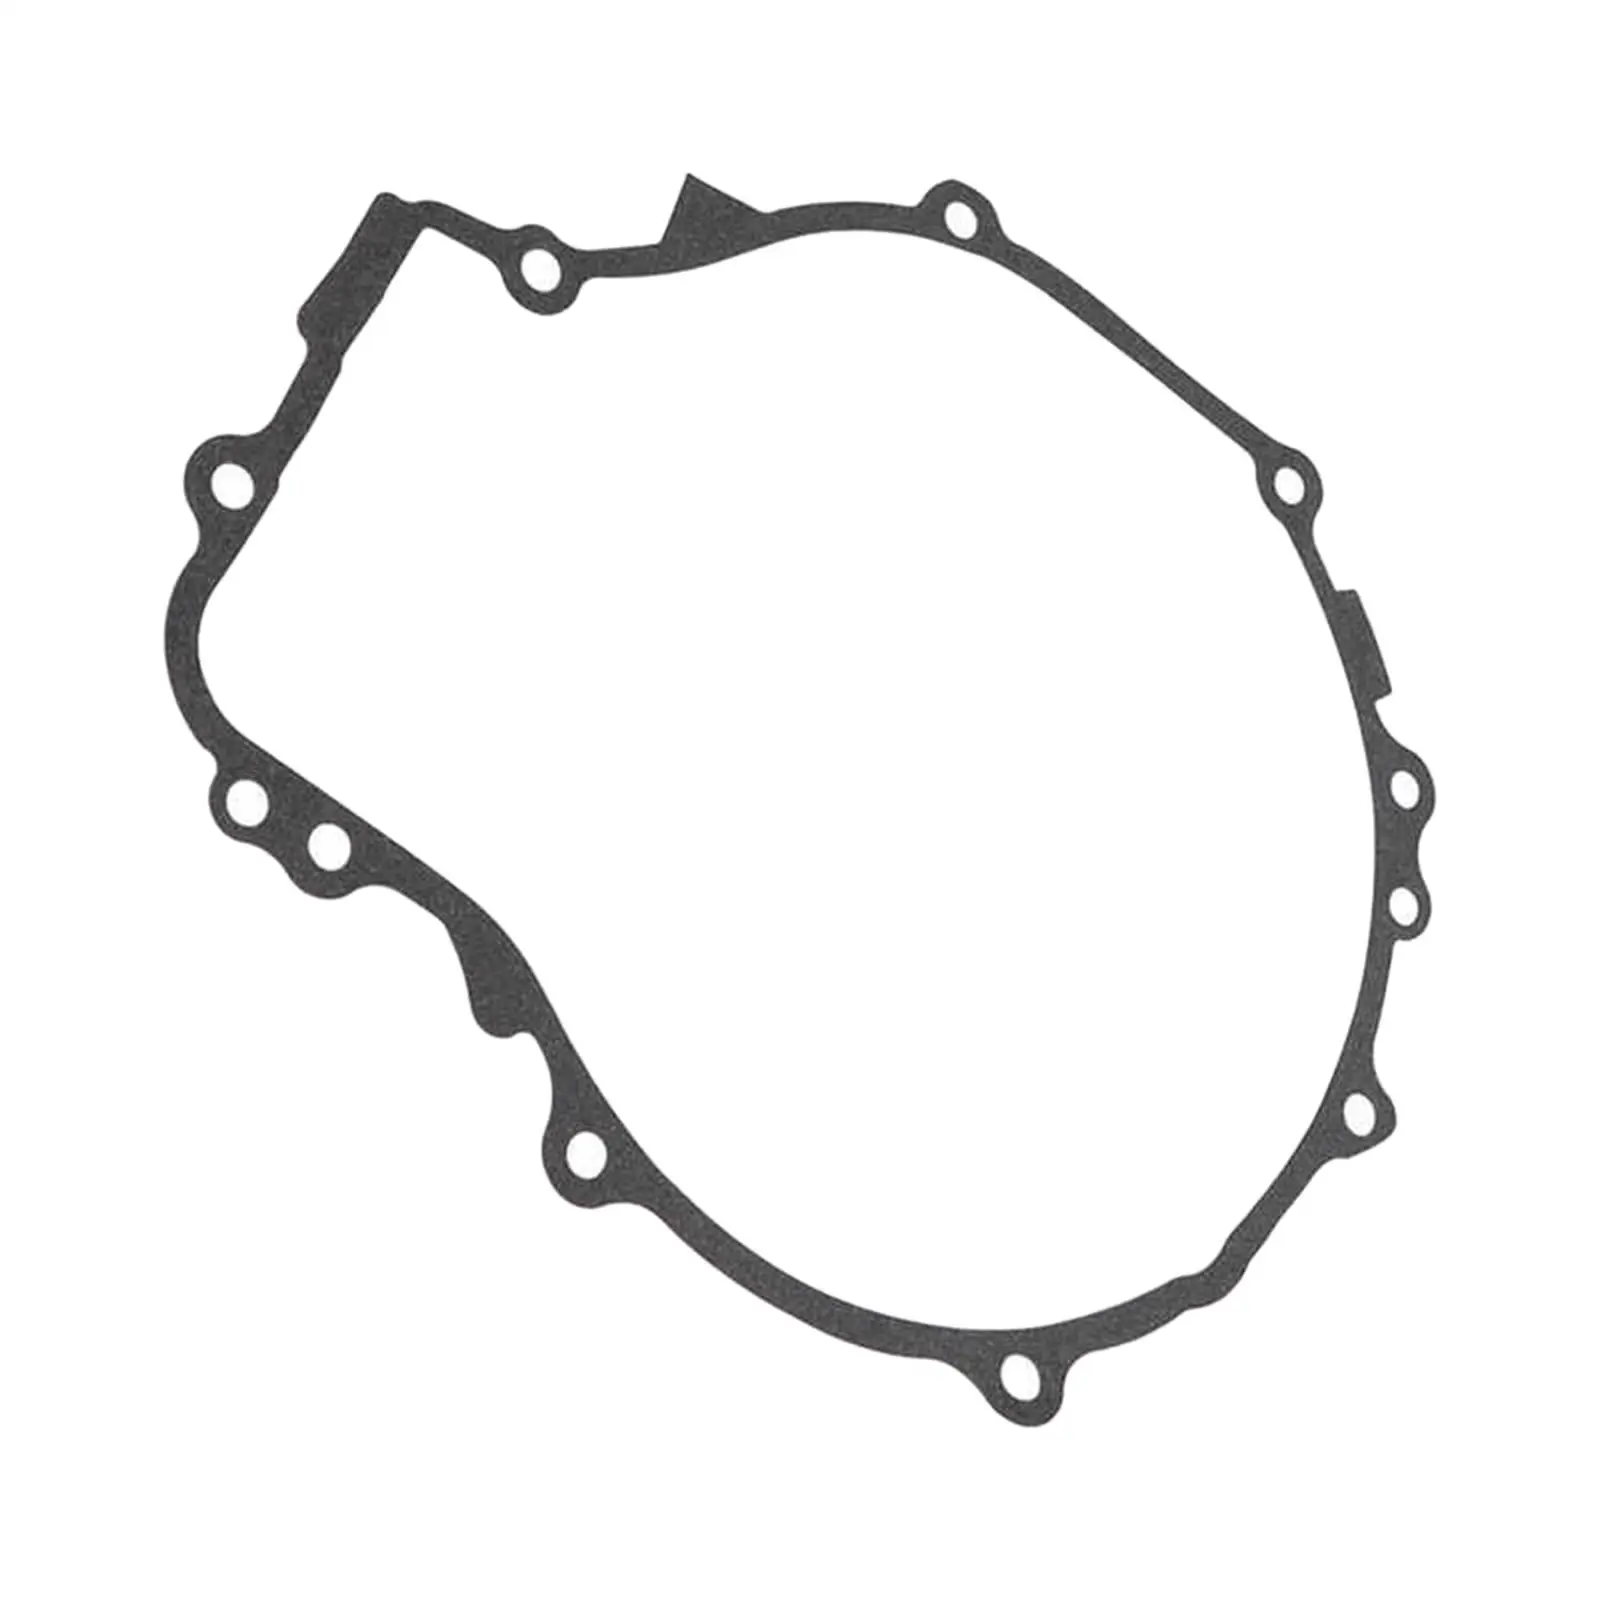 Car Pull Start Gasket 3084933 for Polaris Sportsman 500 1996?2011 Accessory Durable